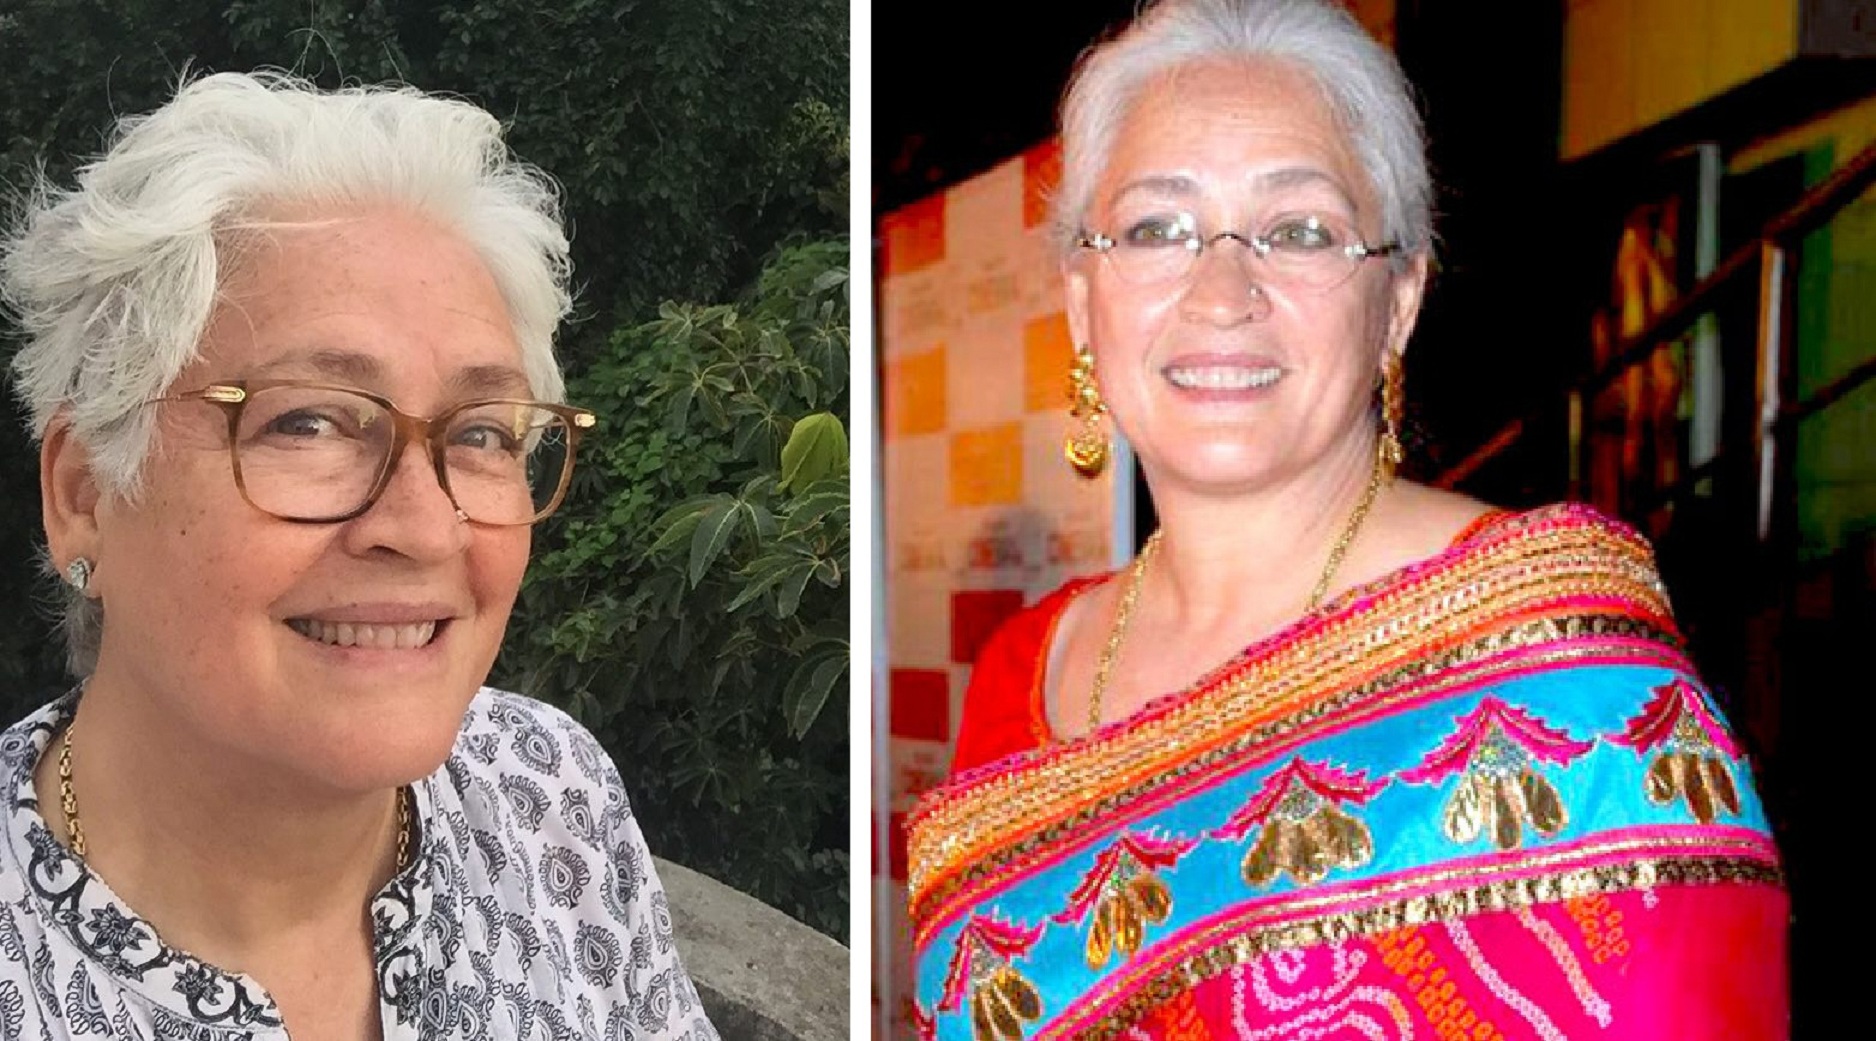 Actress Nafisa Ali Reveals She’s Suffering From Stage 3 Cancer. Shares Latest Pictures On Instagram.